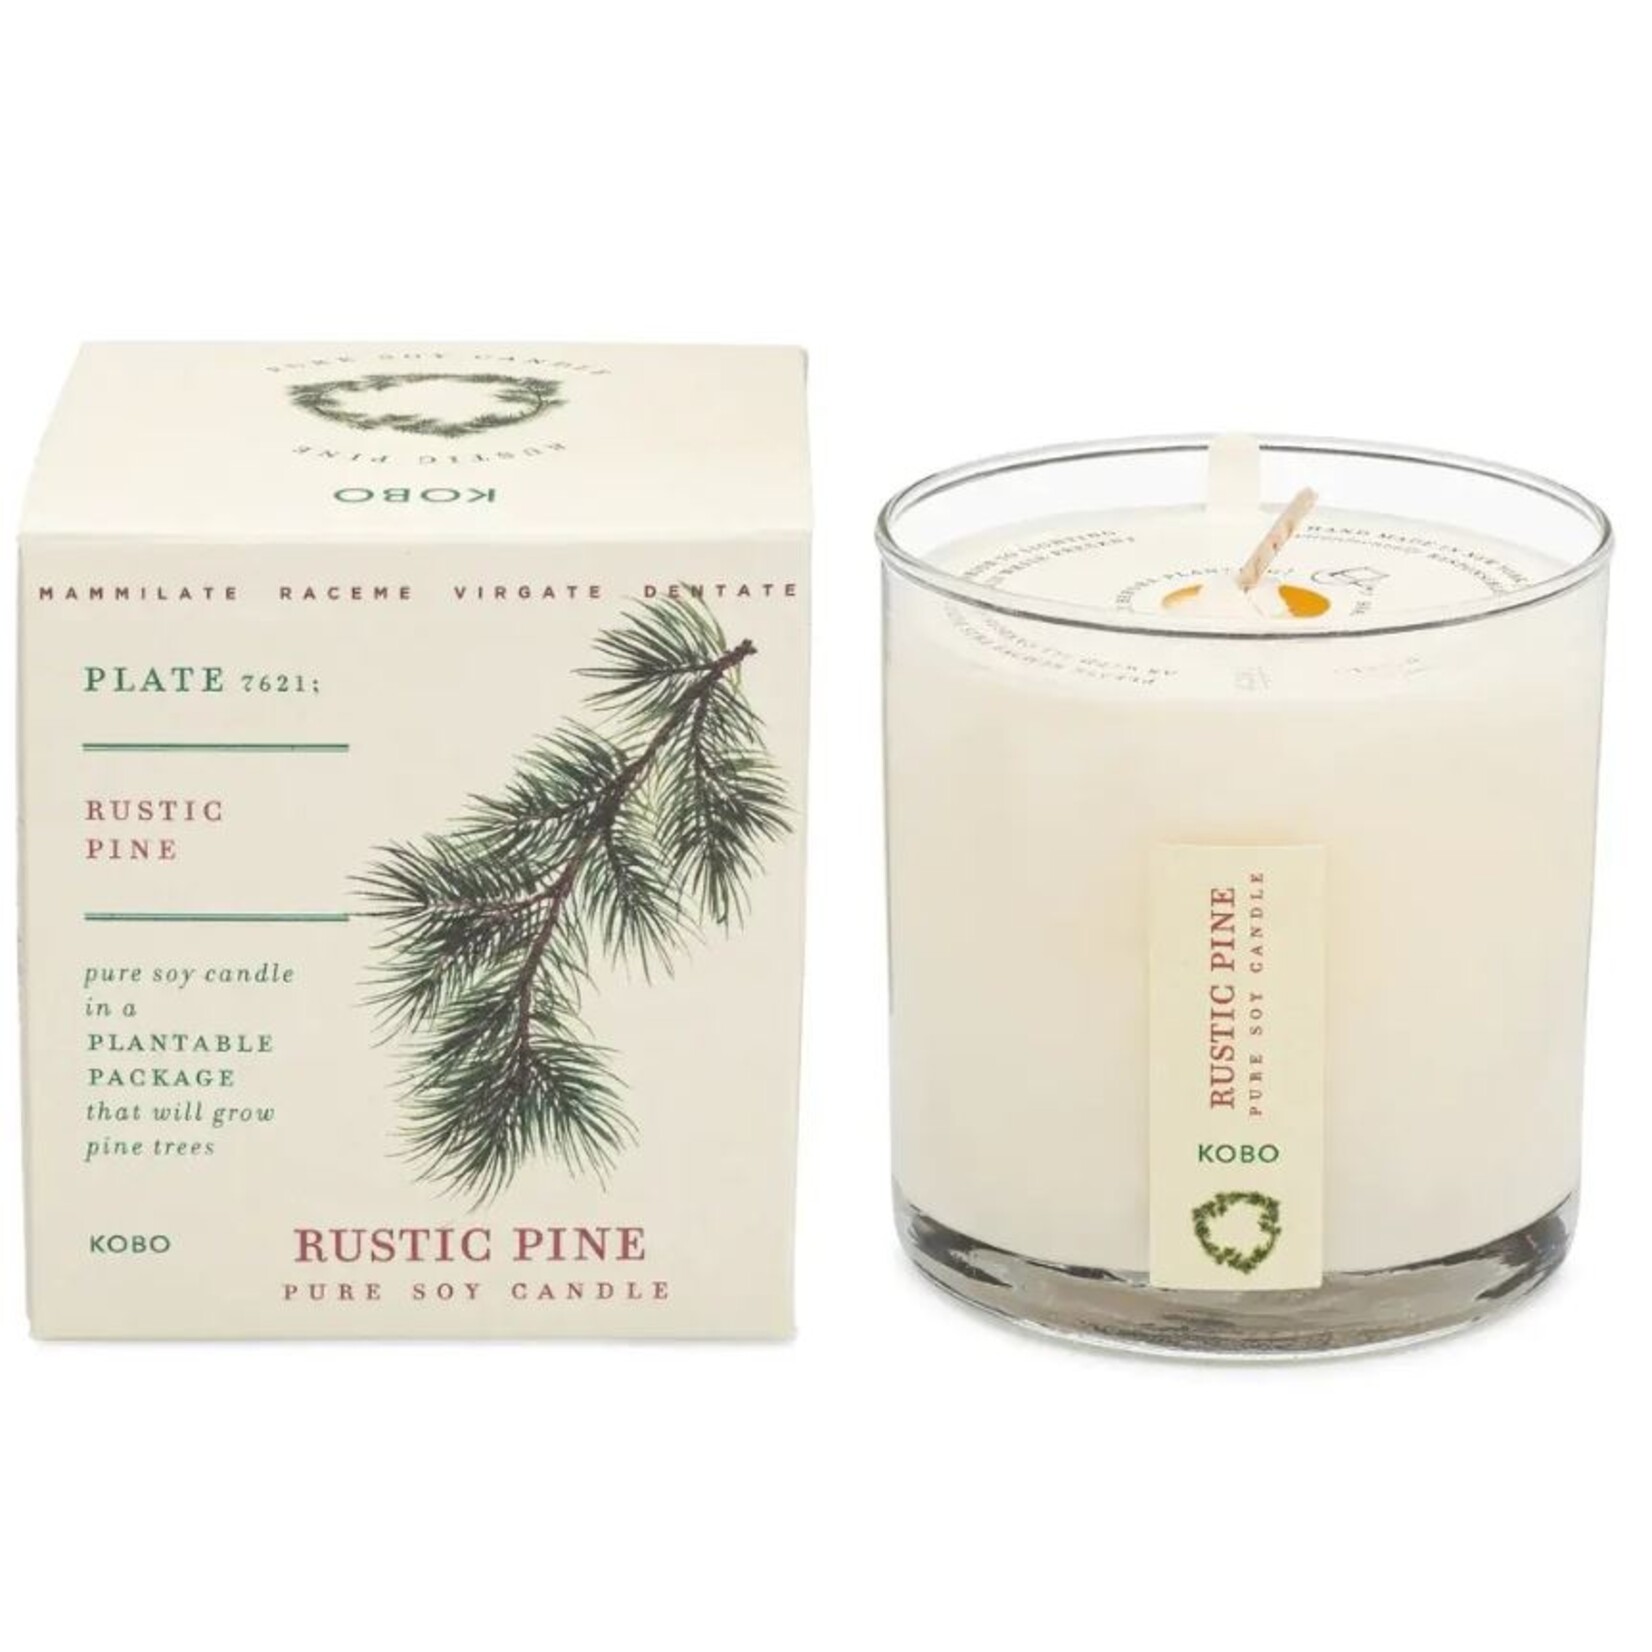 Kobo Rustic Pine Plant The Box Candle